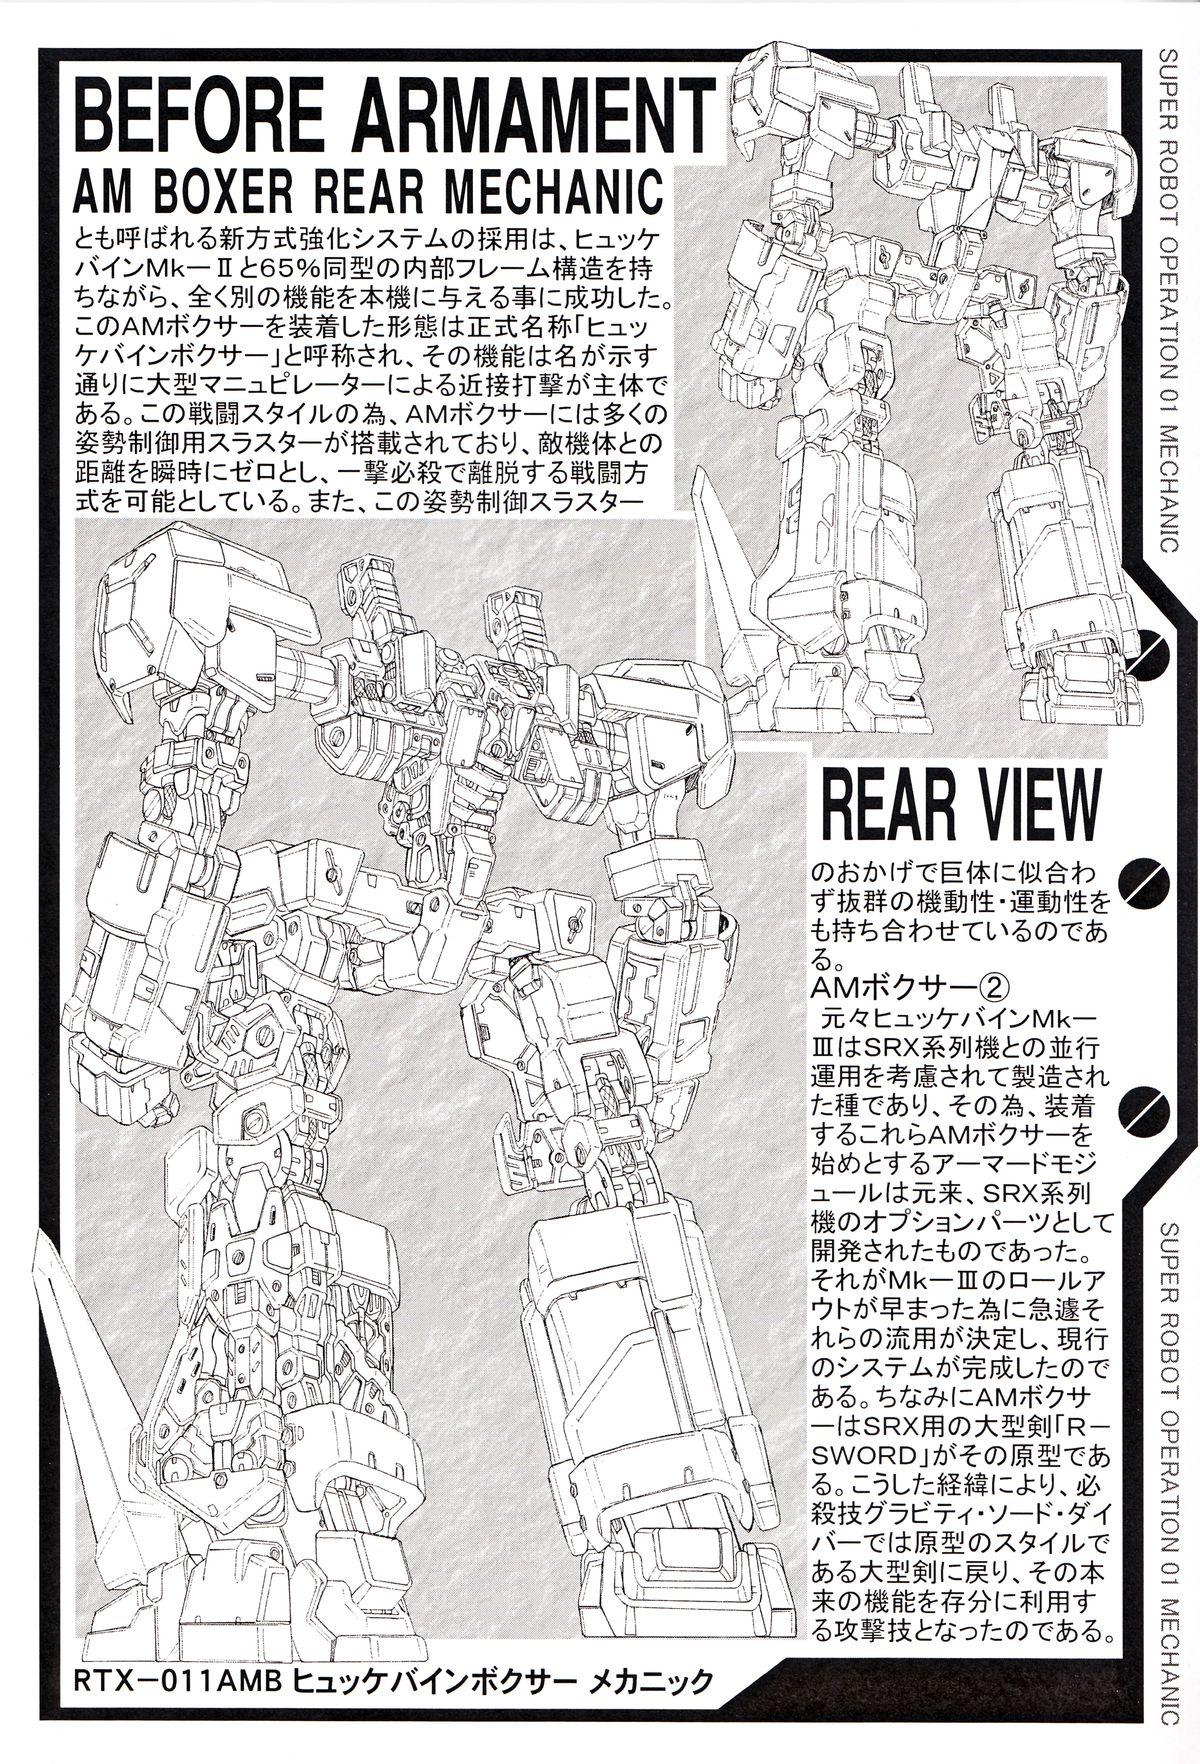 Tight Pussy Porn SUPER ROBOT OPERATION 01 - Super robot wars Gaogaigar Full metal panic Patlabor Voltes v Blue comet spt layzner Periscope - Page 10